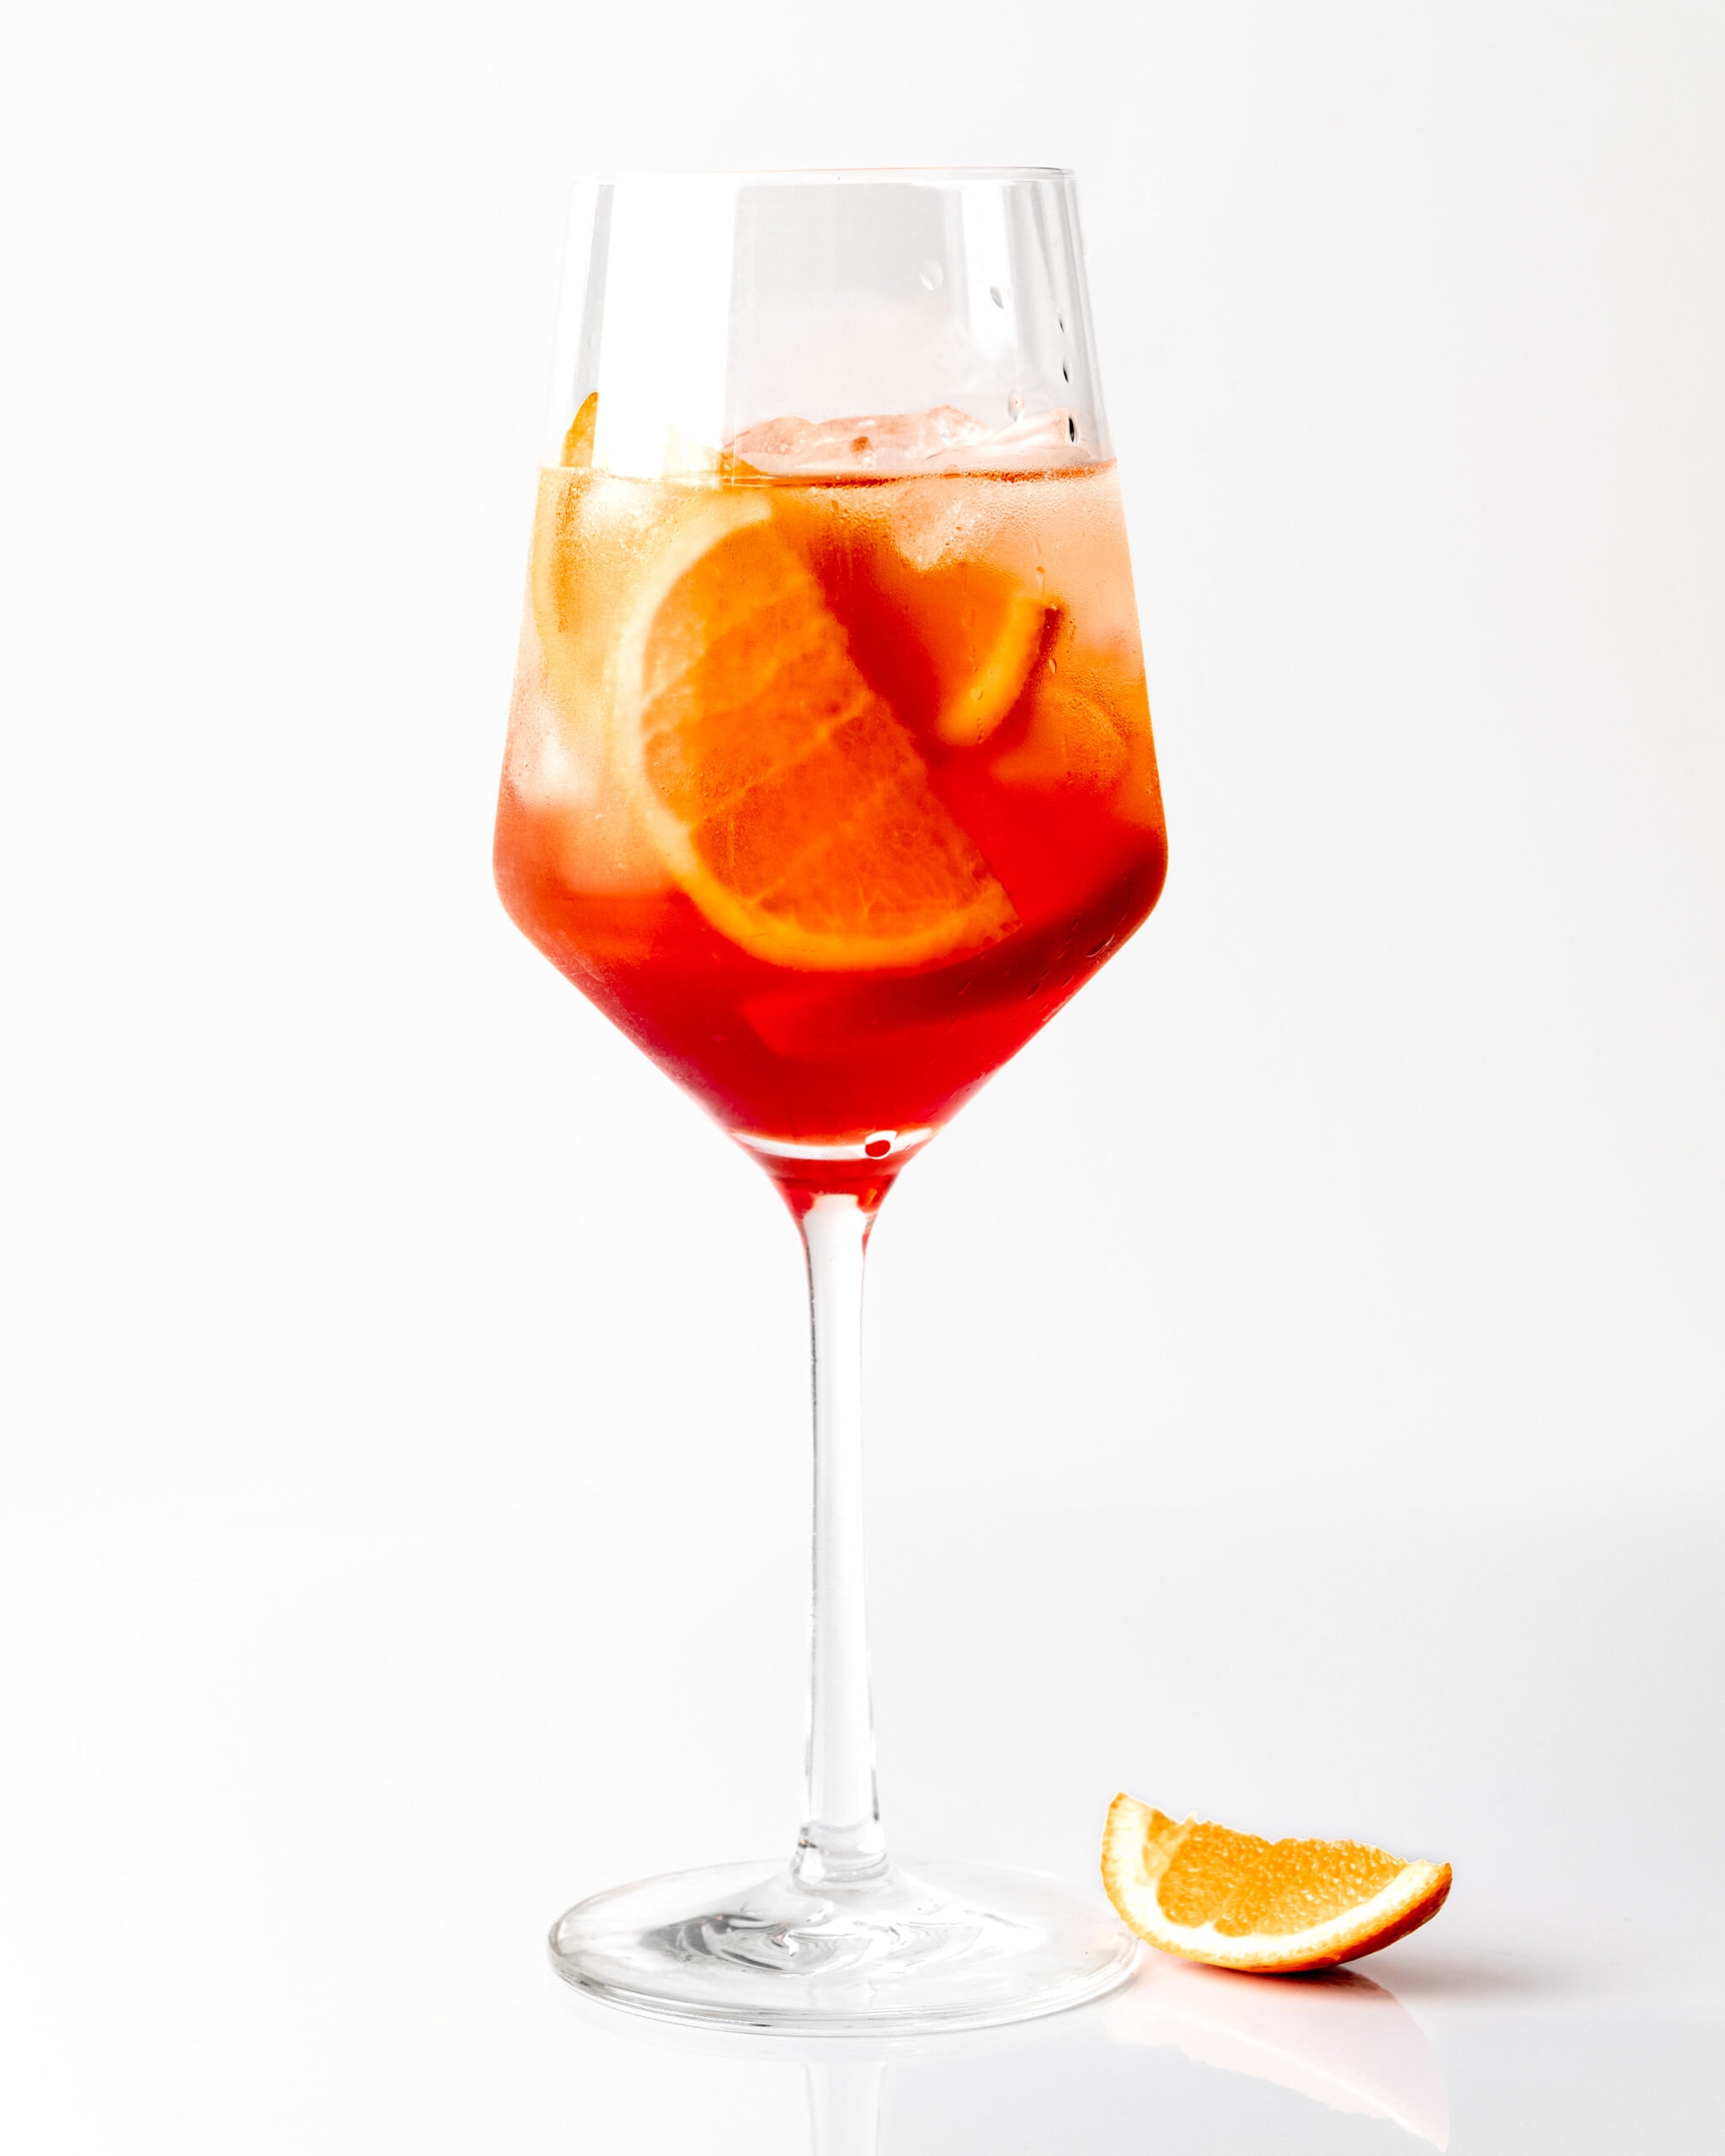 A photo of an Aperol Spritz drink in a glass, with a slice of orange on sitting next to it.